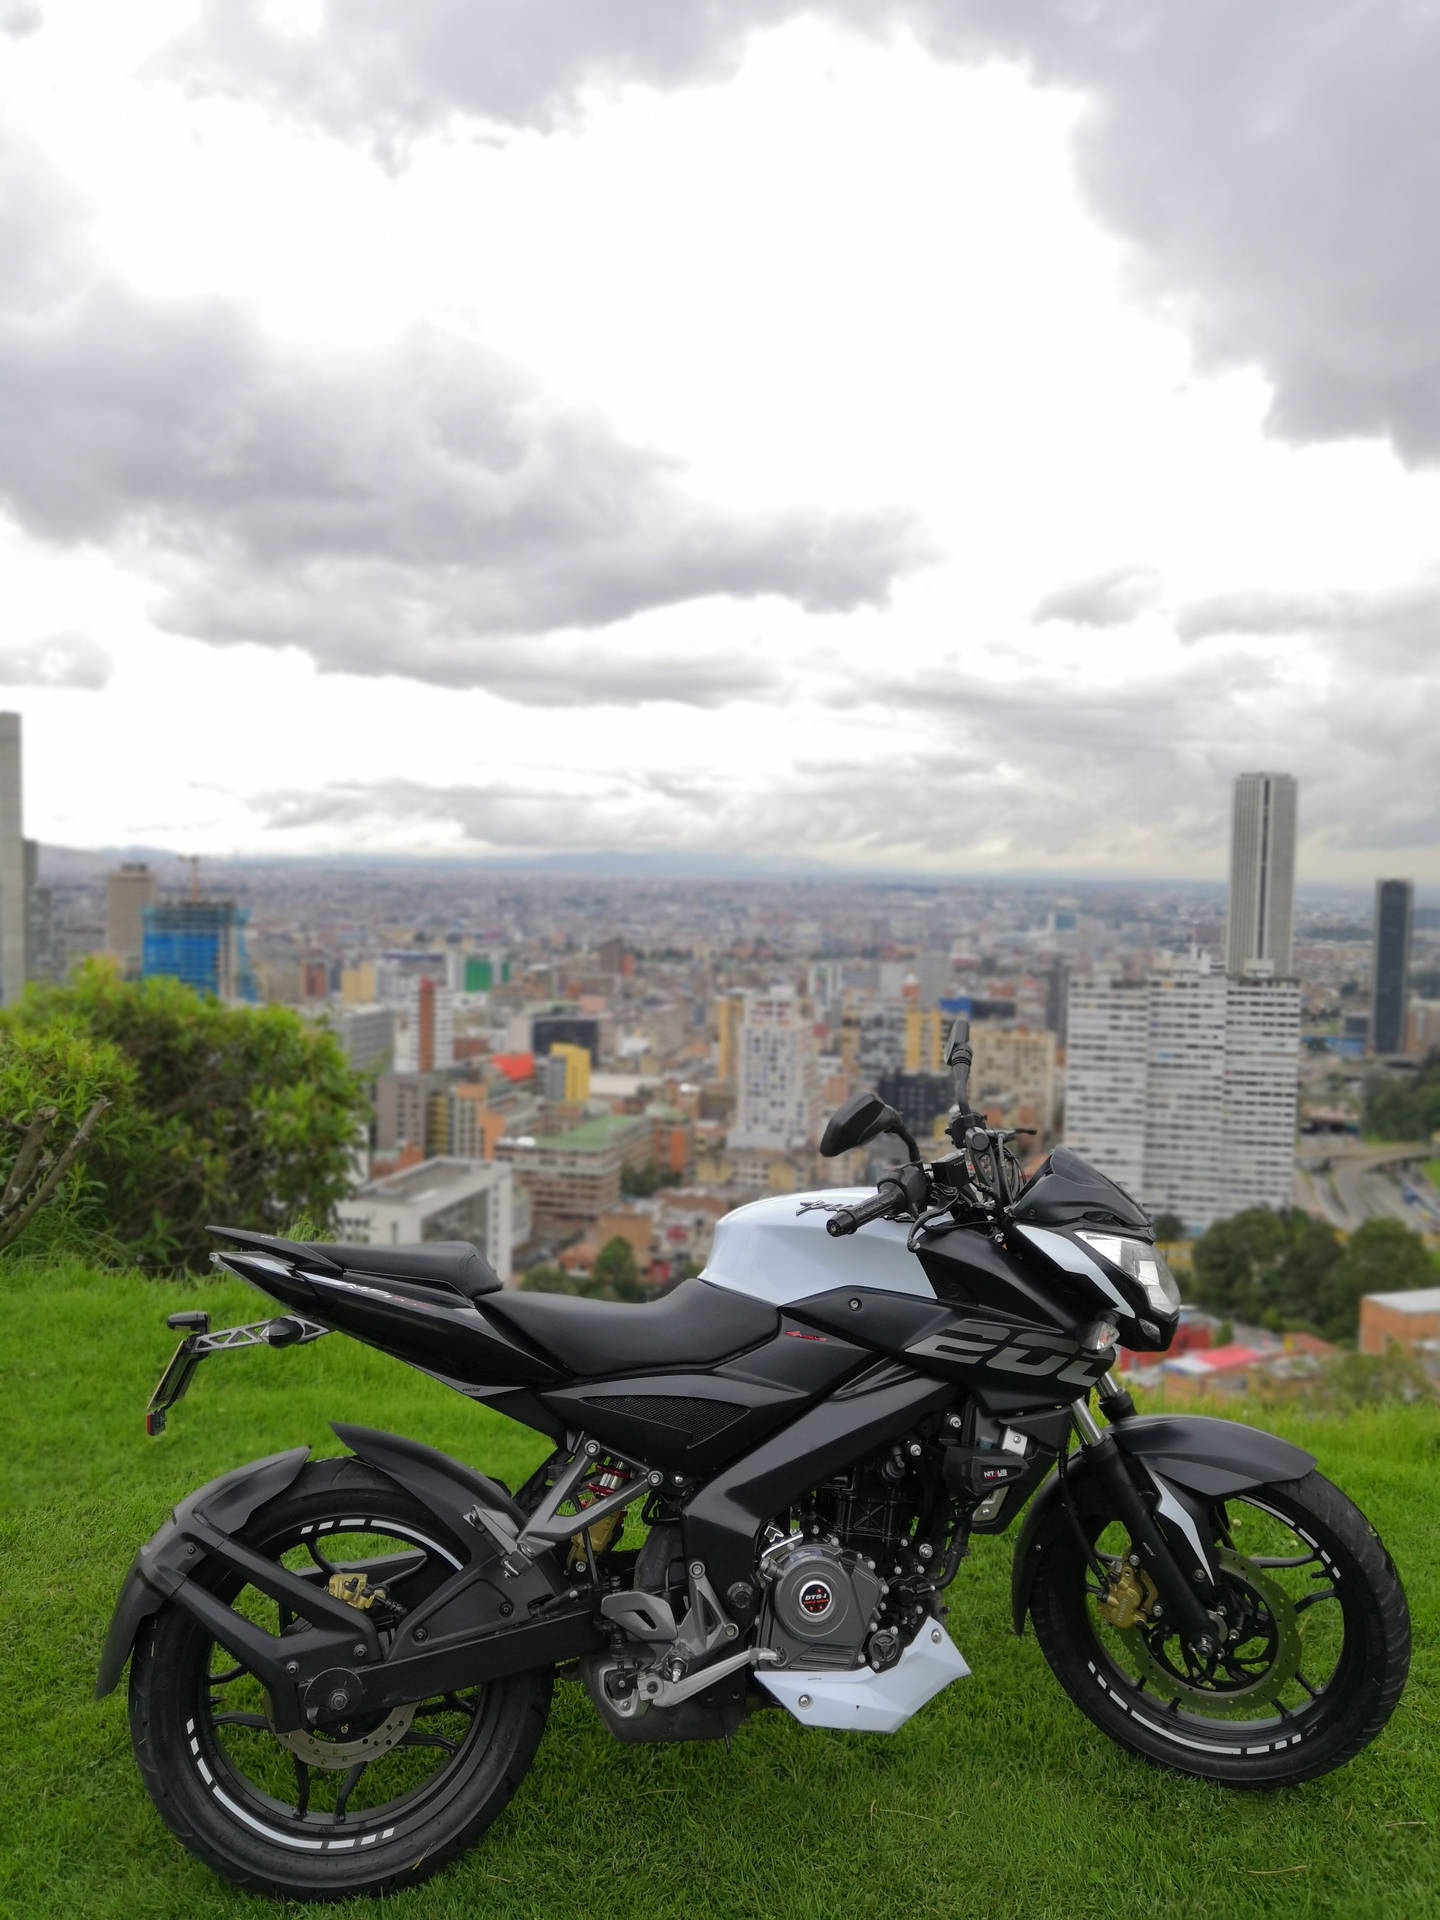 Ns 200 On Hill With City View Background